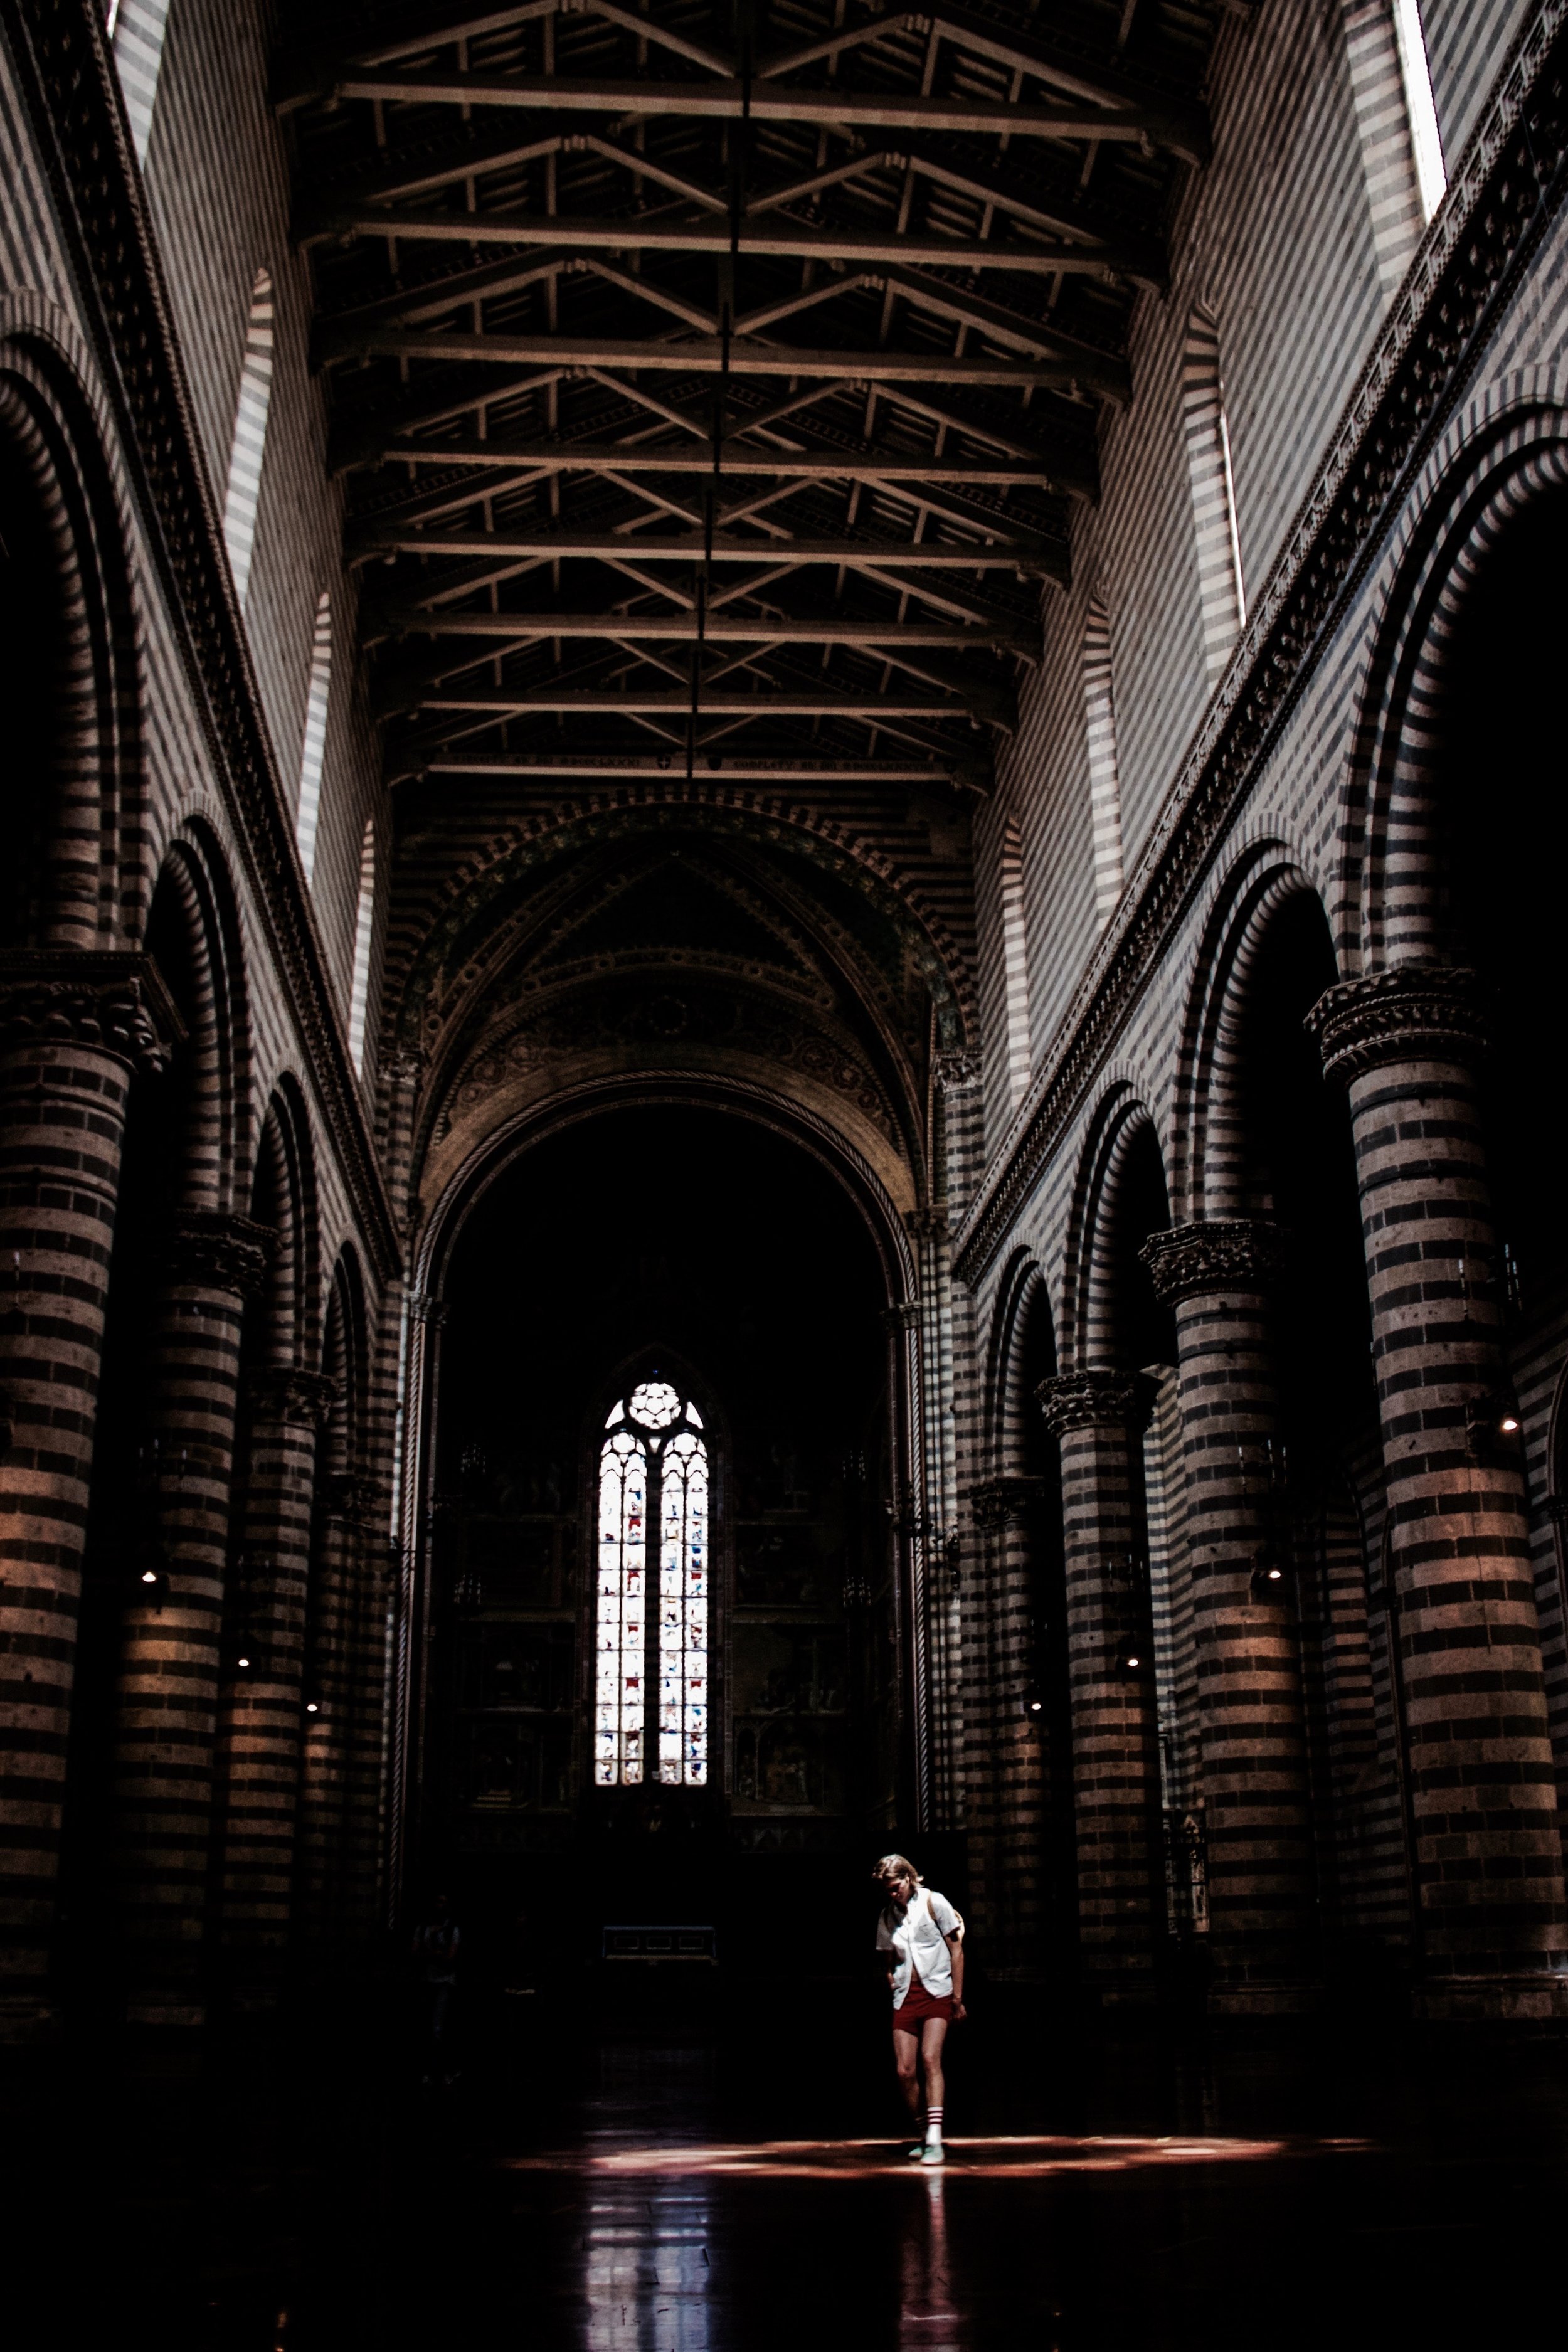 JacobGrantPhotography_Travel, Standing in the Orvieto Duomo